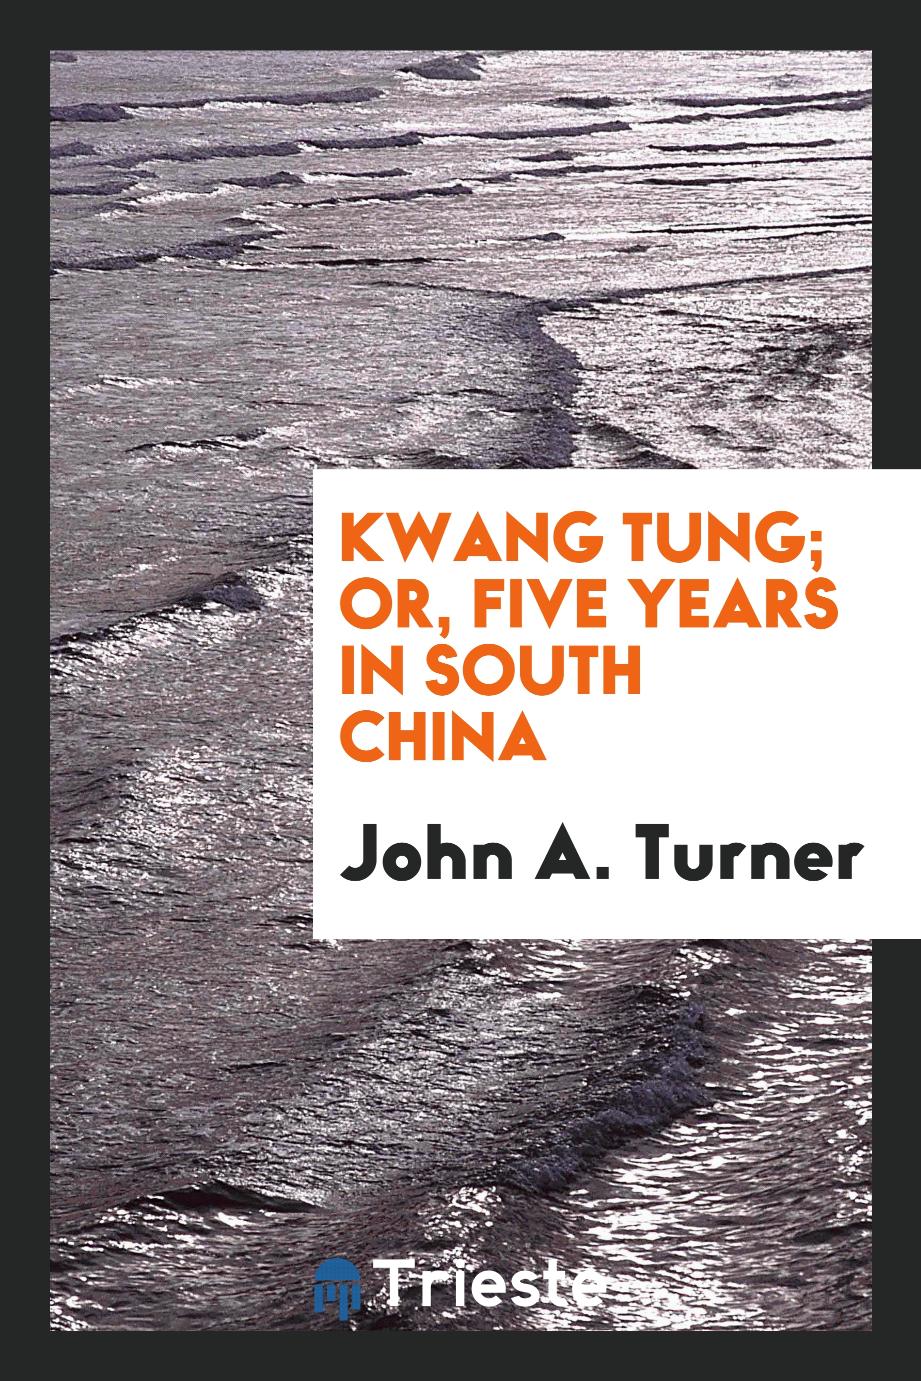 Kwang Tung; or, Five years in south China